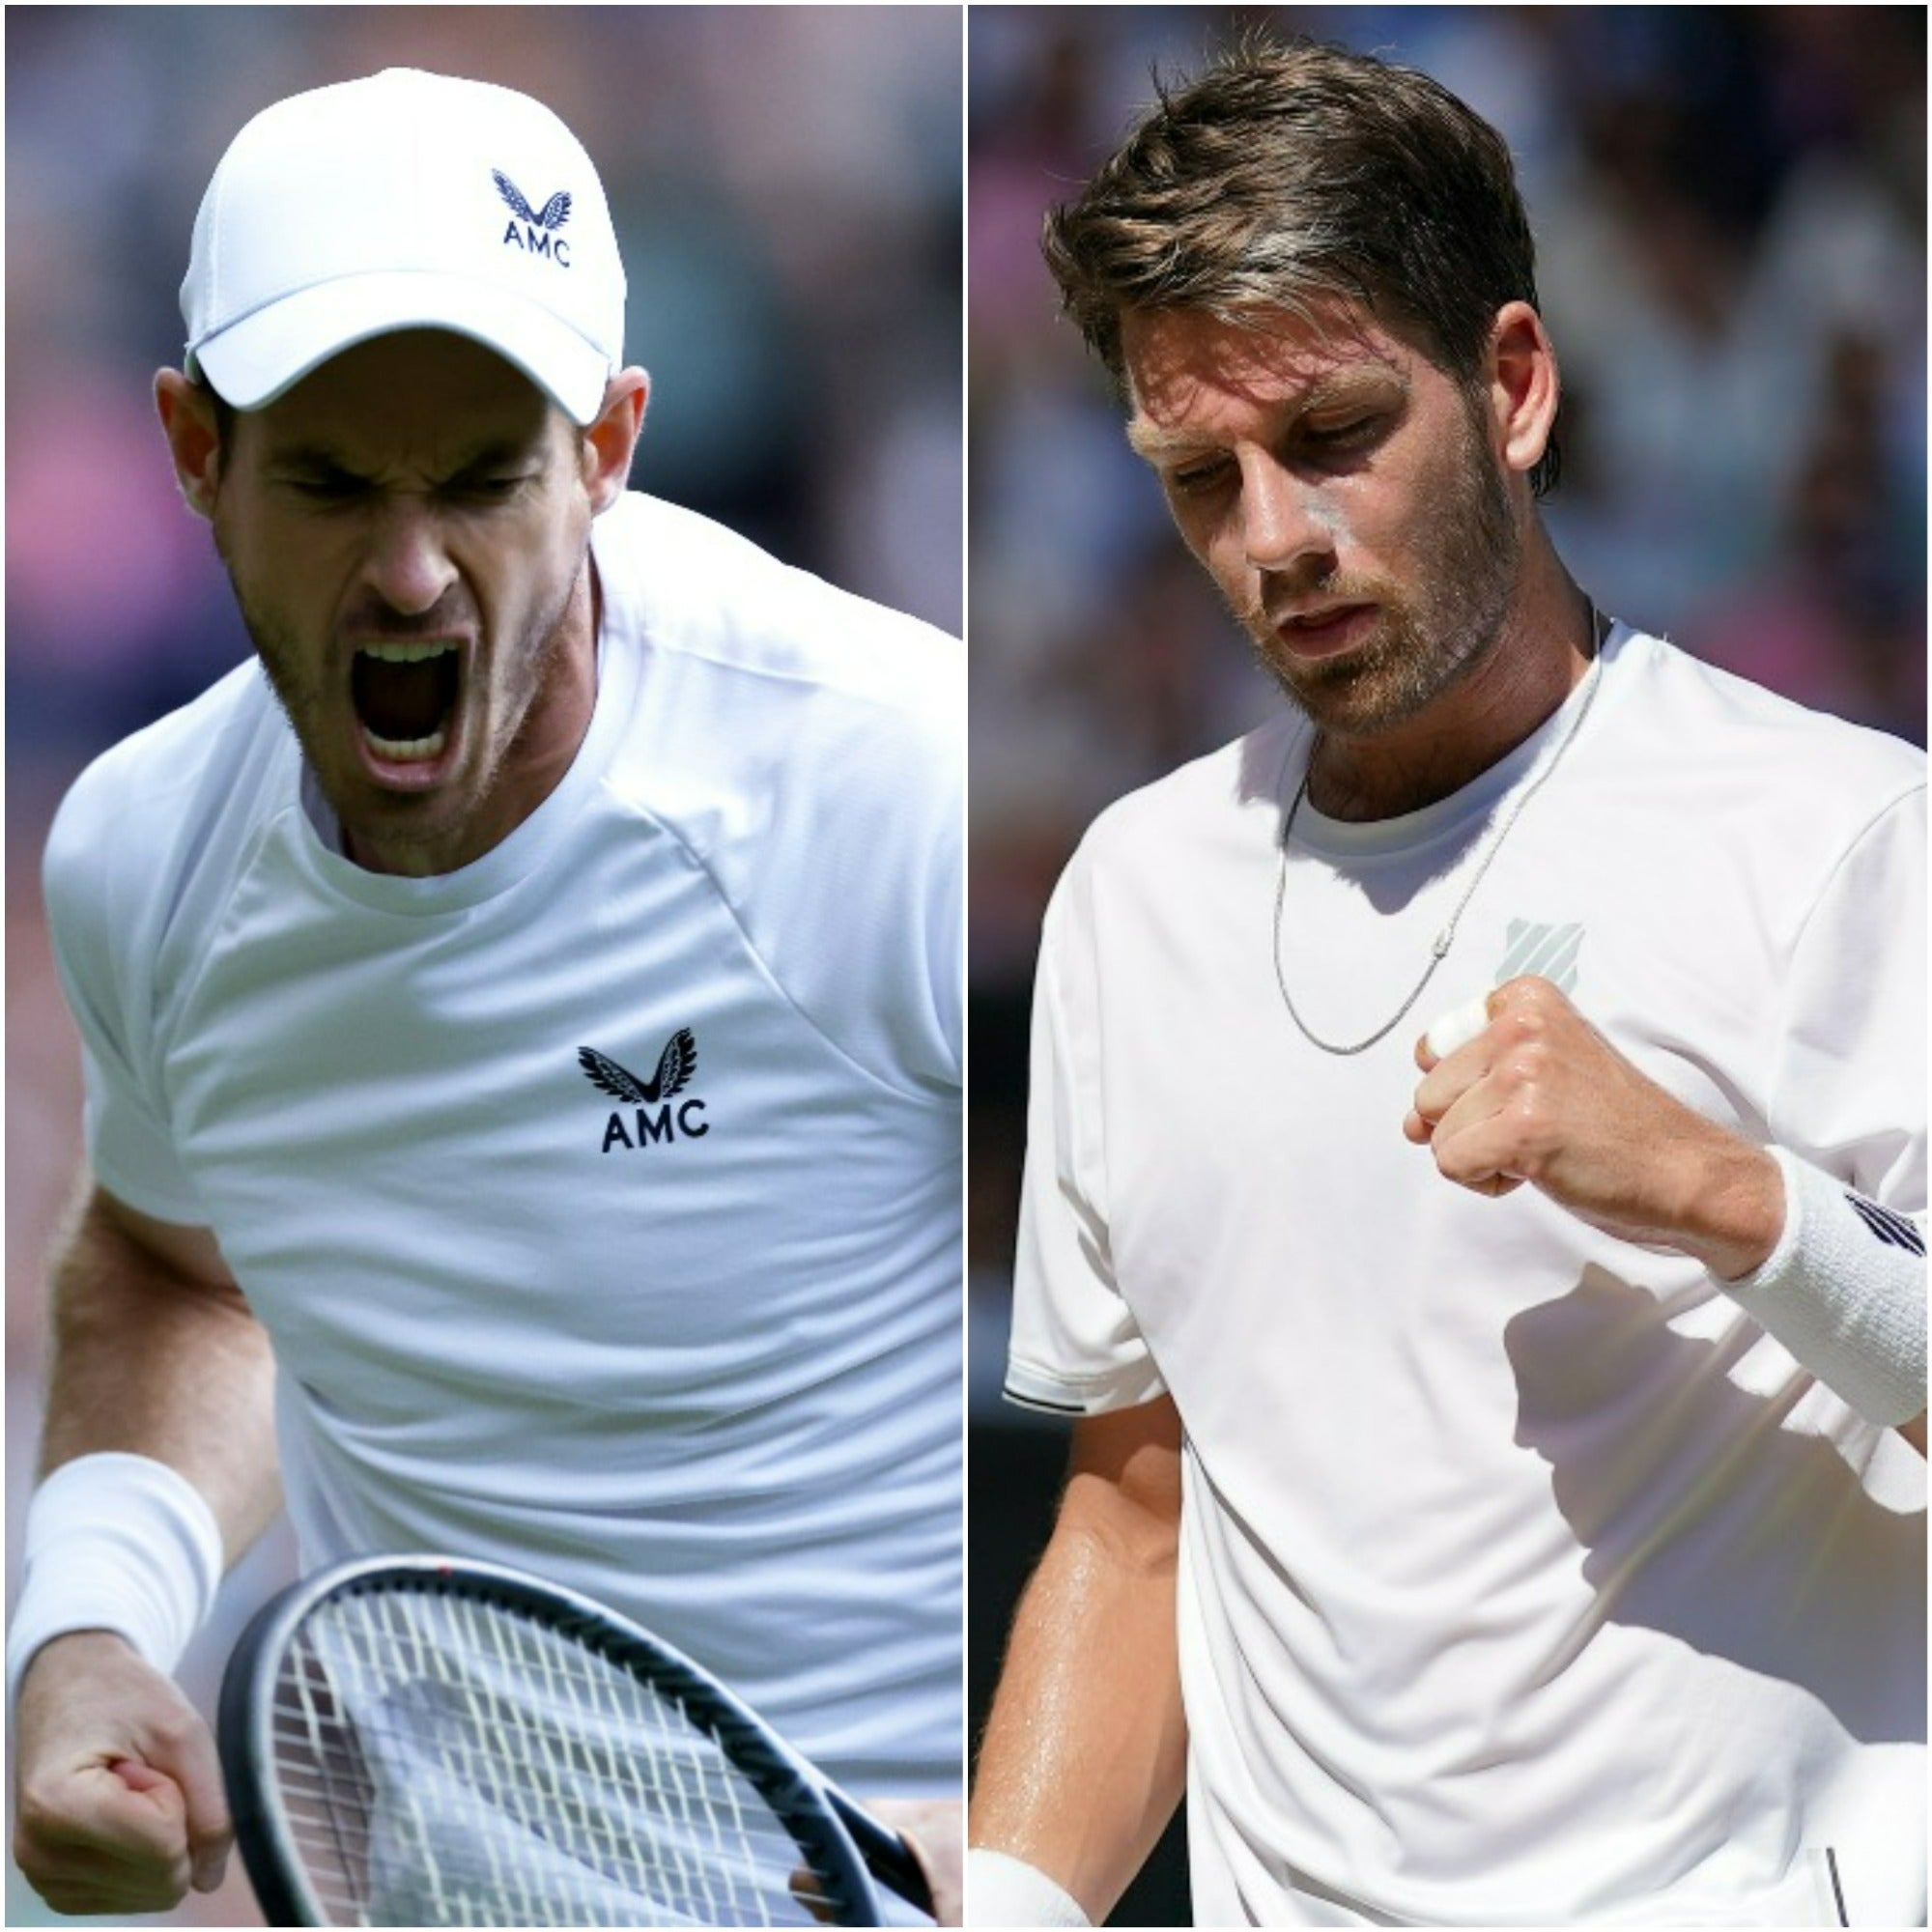 Andy Murray, left, and Cameron Norrie will hope for strong runs at next week’s US Open (Steven Paston/John Walton/PA)